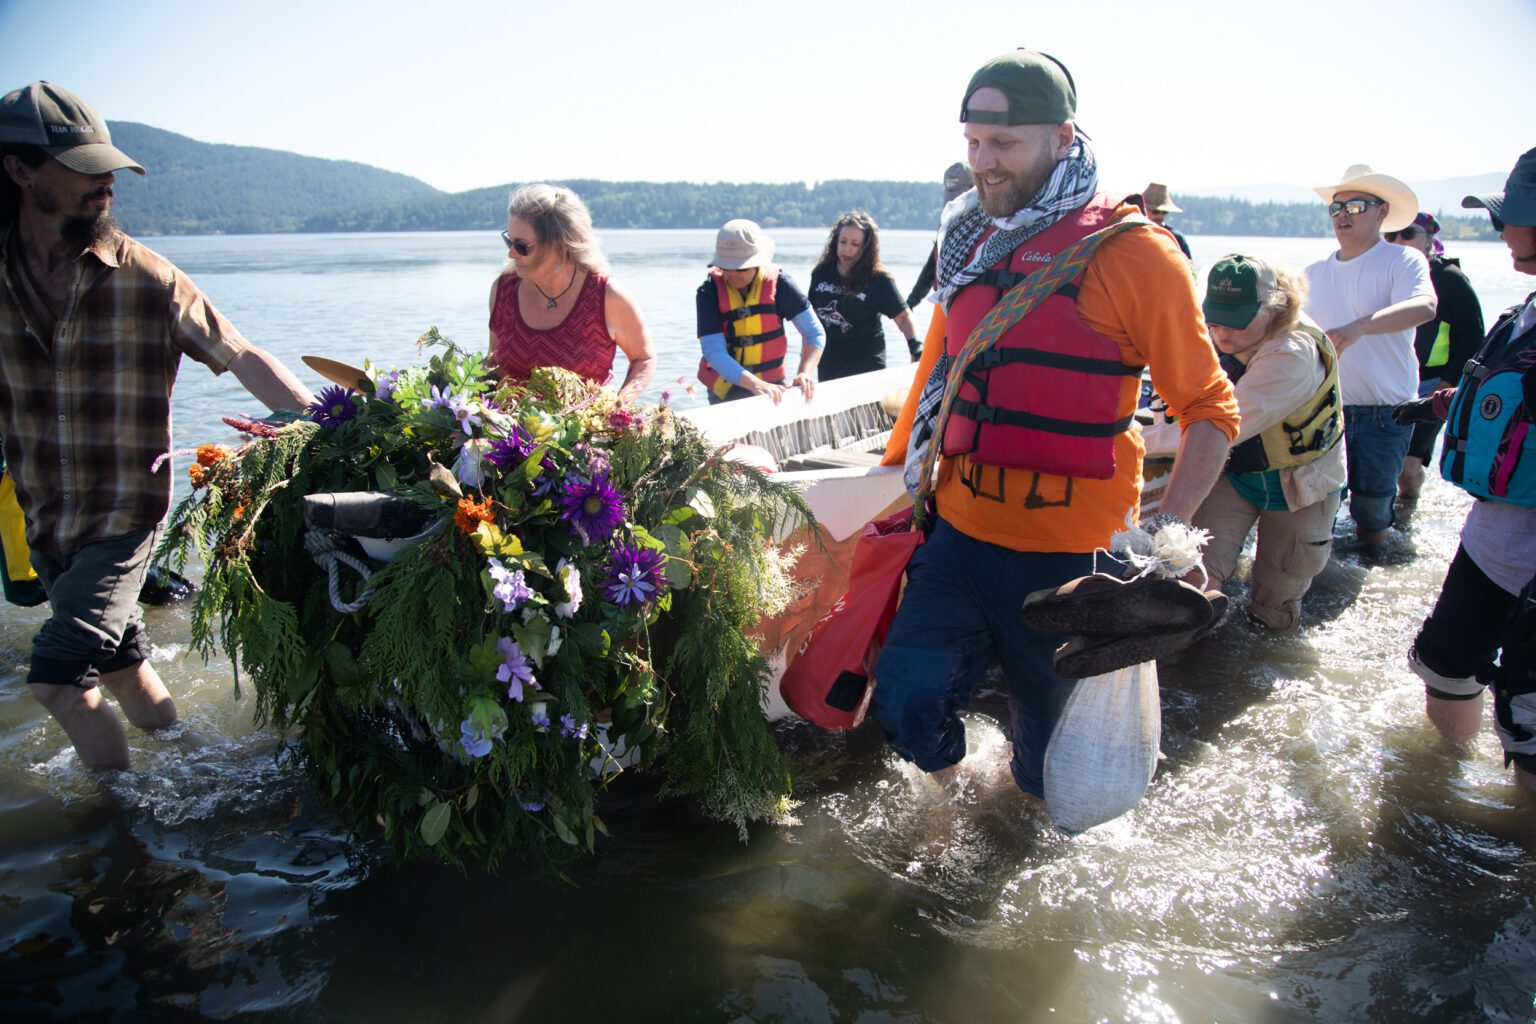 The Octopus Canoe is pulled to shore following the May 26 arrival of the Carvers Camp from Tacoma to the Stommish Grounds of Lummi Nation for the Gathering of the Eagles. Four canoes journeyed for nine days along the “ancestral highway” of the Coast Salish people.